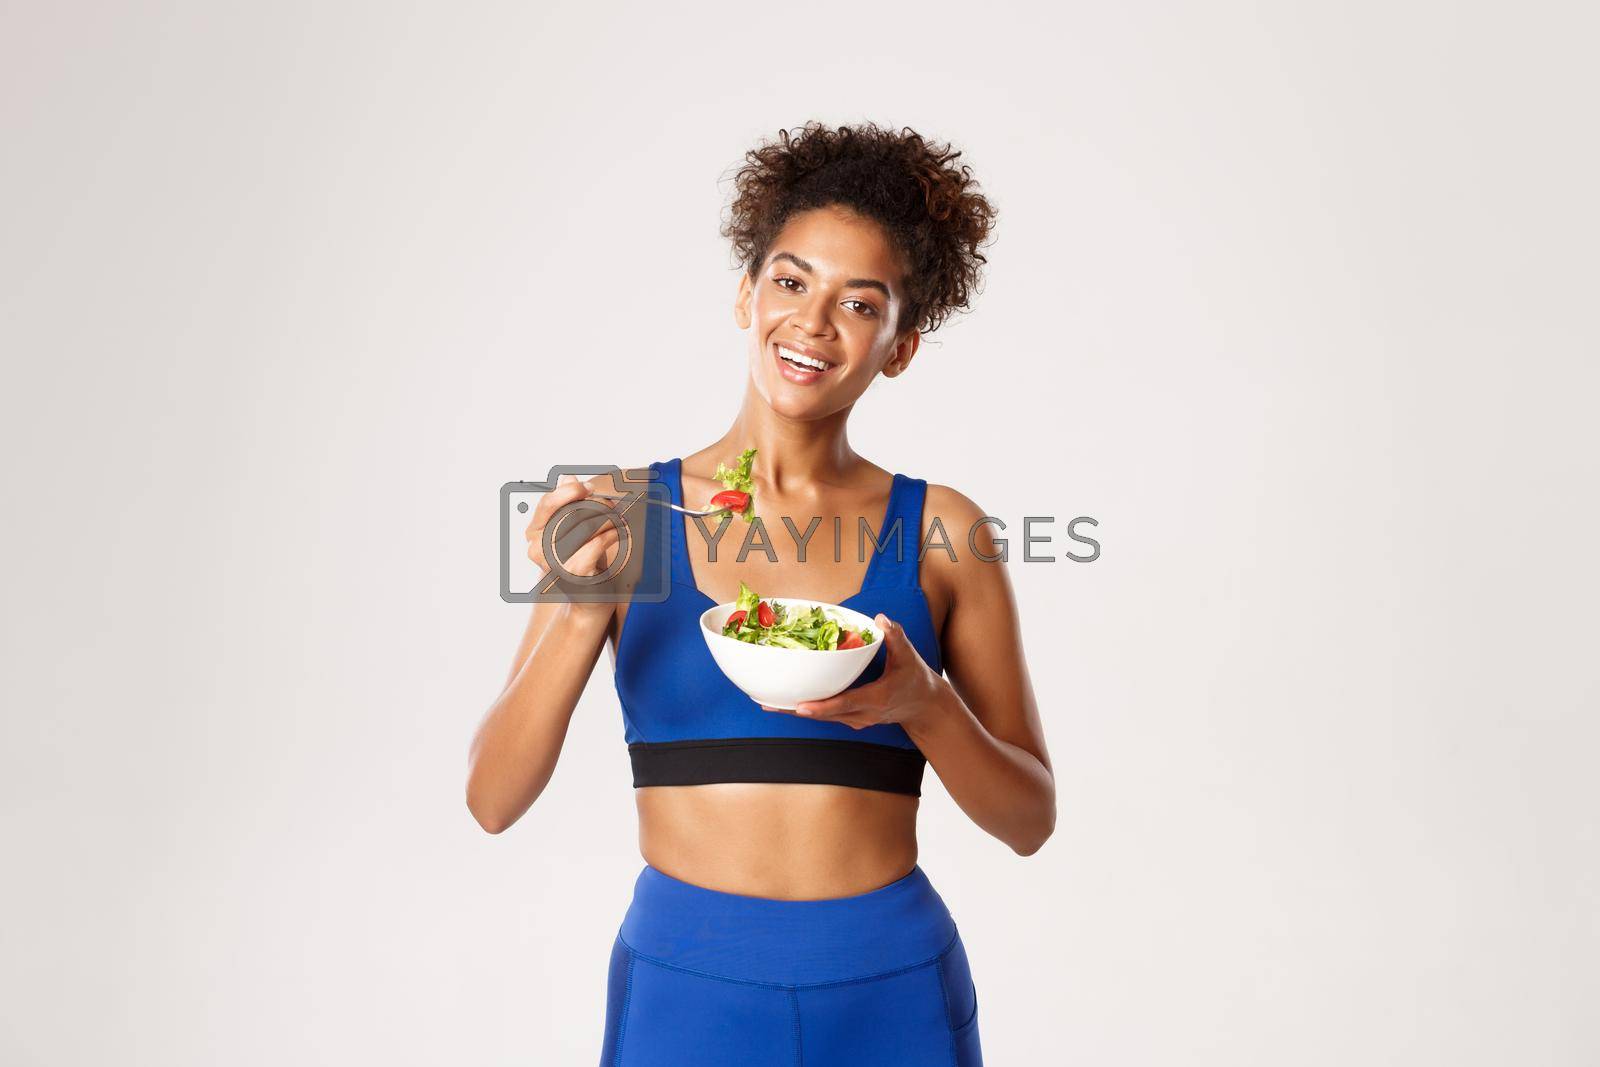 Healthy lifestyle and sport concept. Attractive young fitness woman in blue sport outfit, eating salad and smiling, standing over white background.